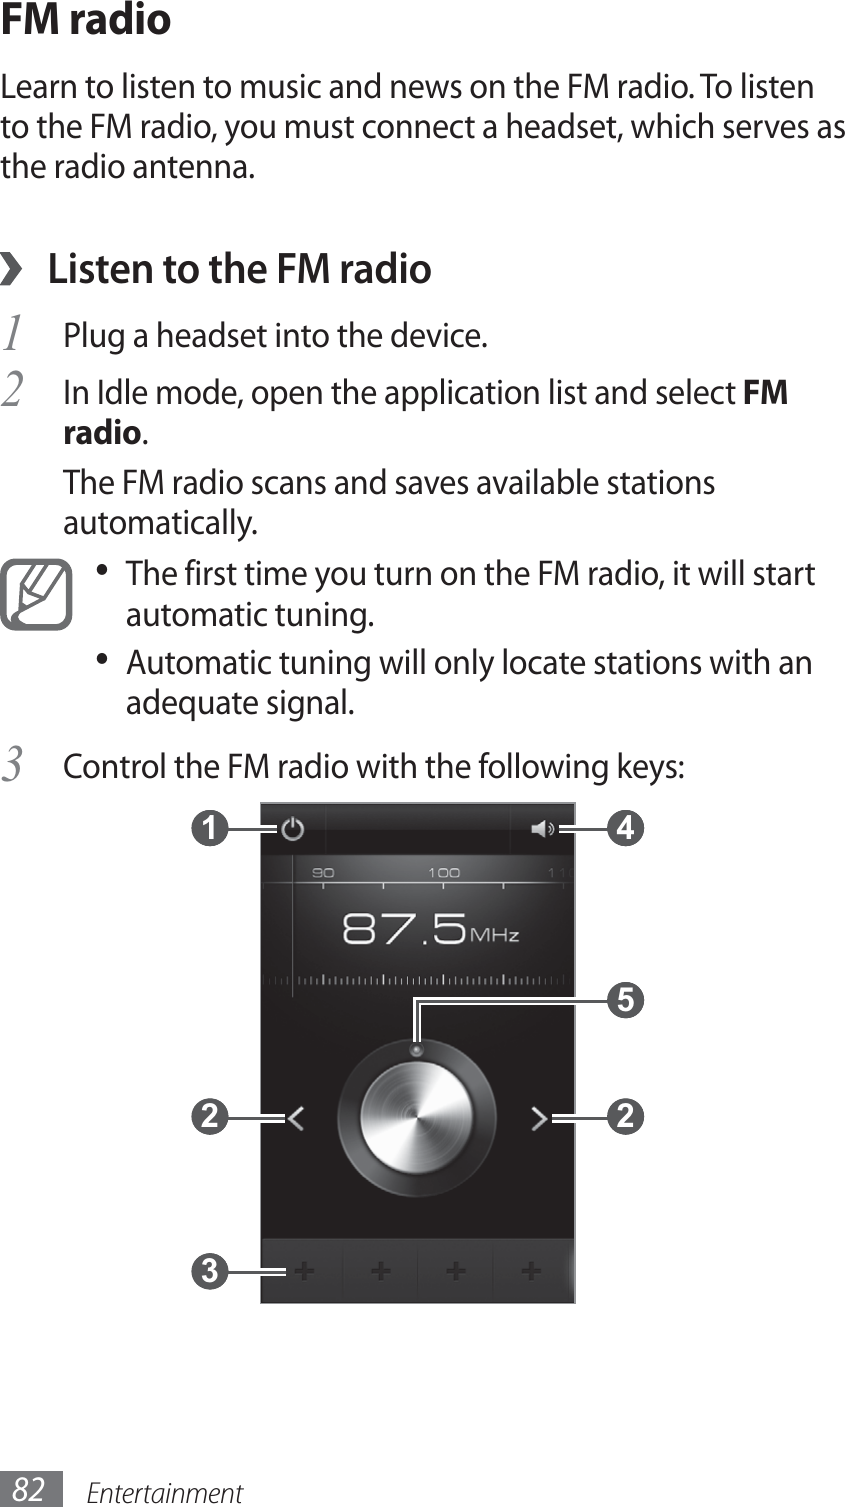 Entertainment82FM radioLearn to listen to music and news on the FM radio. To listen to the FM radio, you must connect a headset, which serves as the radio antenna.Listen to the FM radio ›Plug a headset into the device.1 In Idle mode, open the application list and select 2 FM radio.The FM radio scans and saves available stations automatically.The first time you turn on the FM radio, it will start • automatic tuning.Automatic tuning will only locate stations with an • adequate signal. Control the FM radio with the following keys:3  1  2  3  4  5  2 